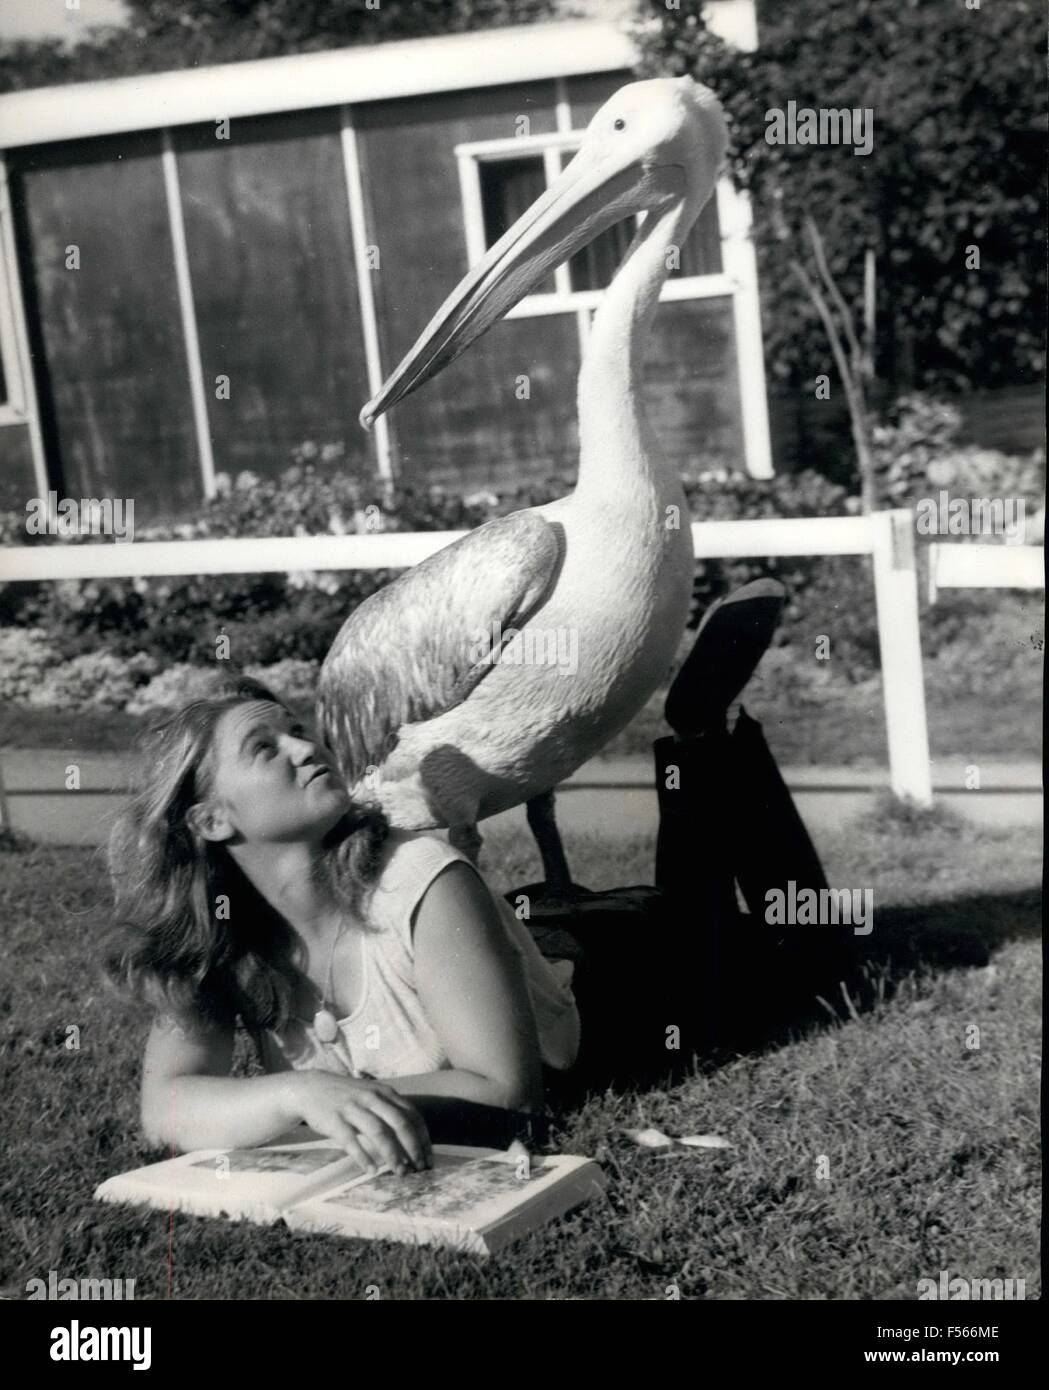 1968 - How to Pelican can.or, Birds of a Feather: A bird in the hand is worth two in the bush they say - so you're well up on points if you've get two on the grass. Especially if one's a dancing pelican and the other a pretty girl - you can ignore proverbs. 20-years-old blonde Gillian Houghton, of Plymouth, was reading peacefully on the grass in the garden when suddenly a Pelican appeared, and clambered rudely on her back. Not only that - he stayed there and decided this was the place to relax. Gillian didn't seem to mind as this is the sort of thing that always happens around where she liv Stock Photo